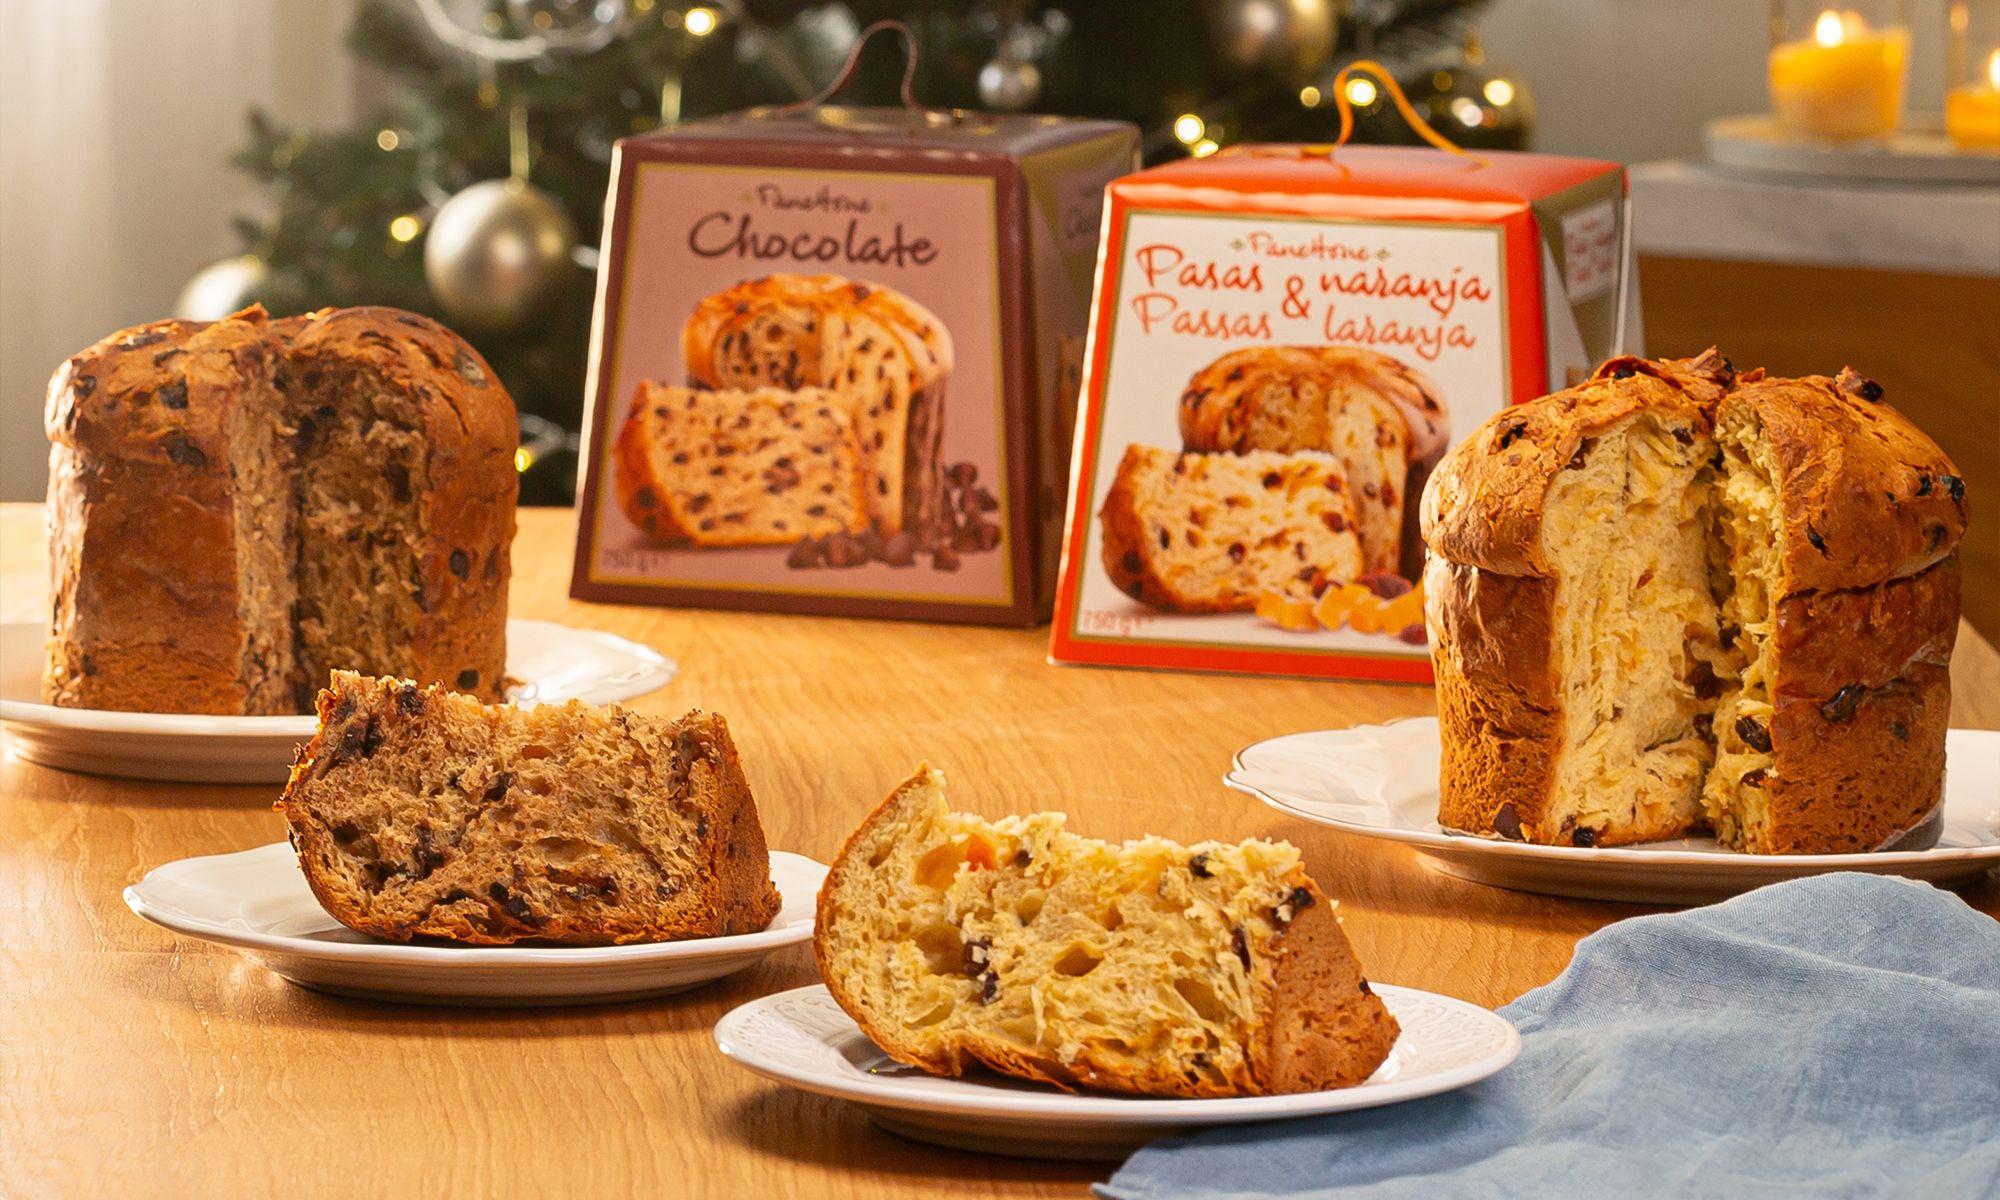 This is the new Panettone from Mercadona in Valencia, winner of the Best in the World award